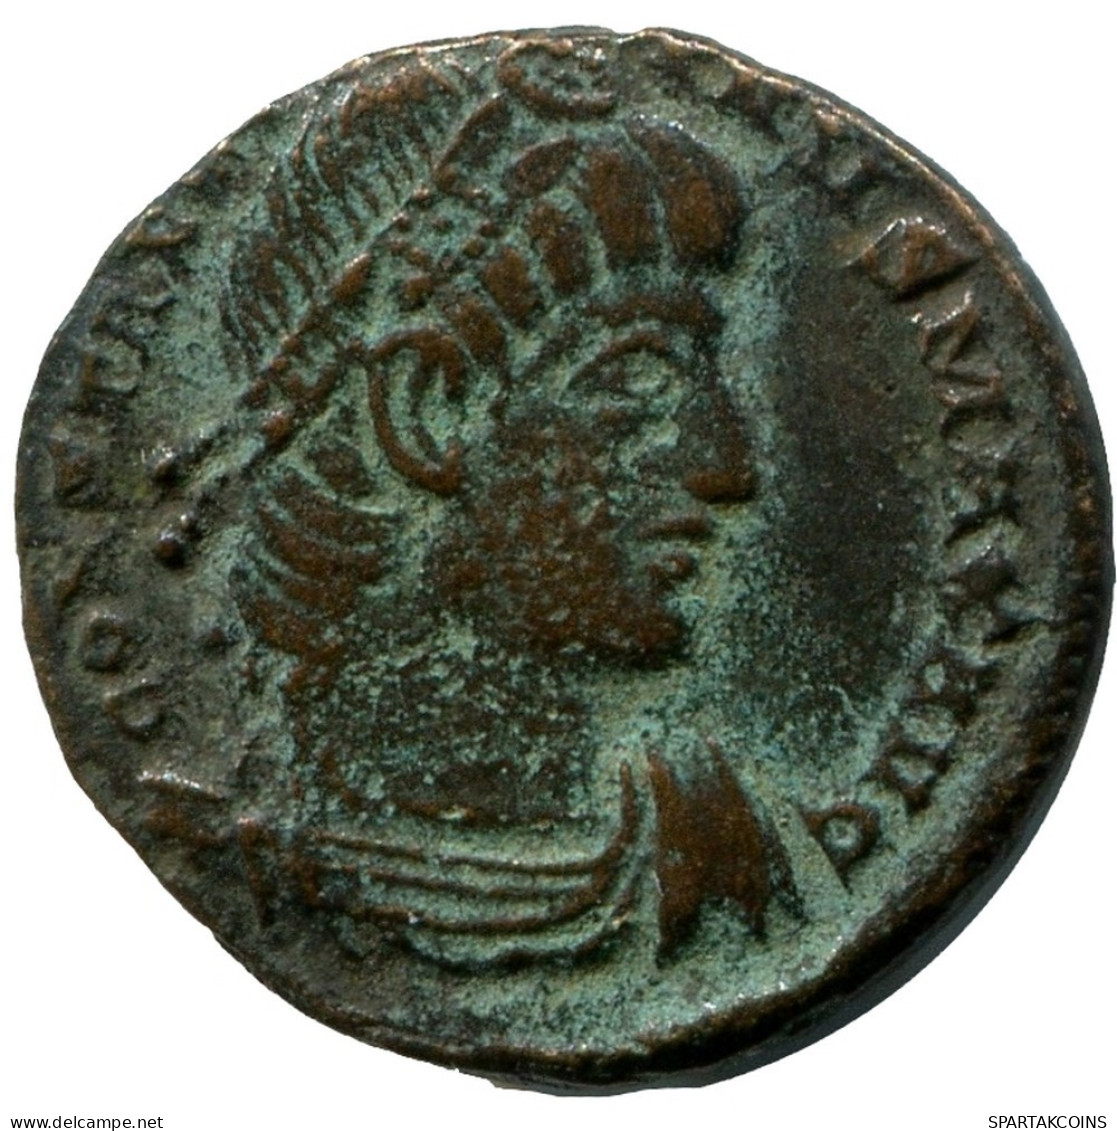 CONSTANTINE I MINTED IN CONSTANTINOPLE FOUND IN IHNASYAH HOARD #ANC10730.14.D.A - The Christian Empire (307 AD To 363 AD)